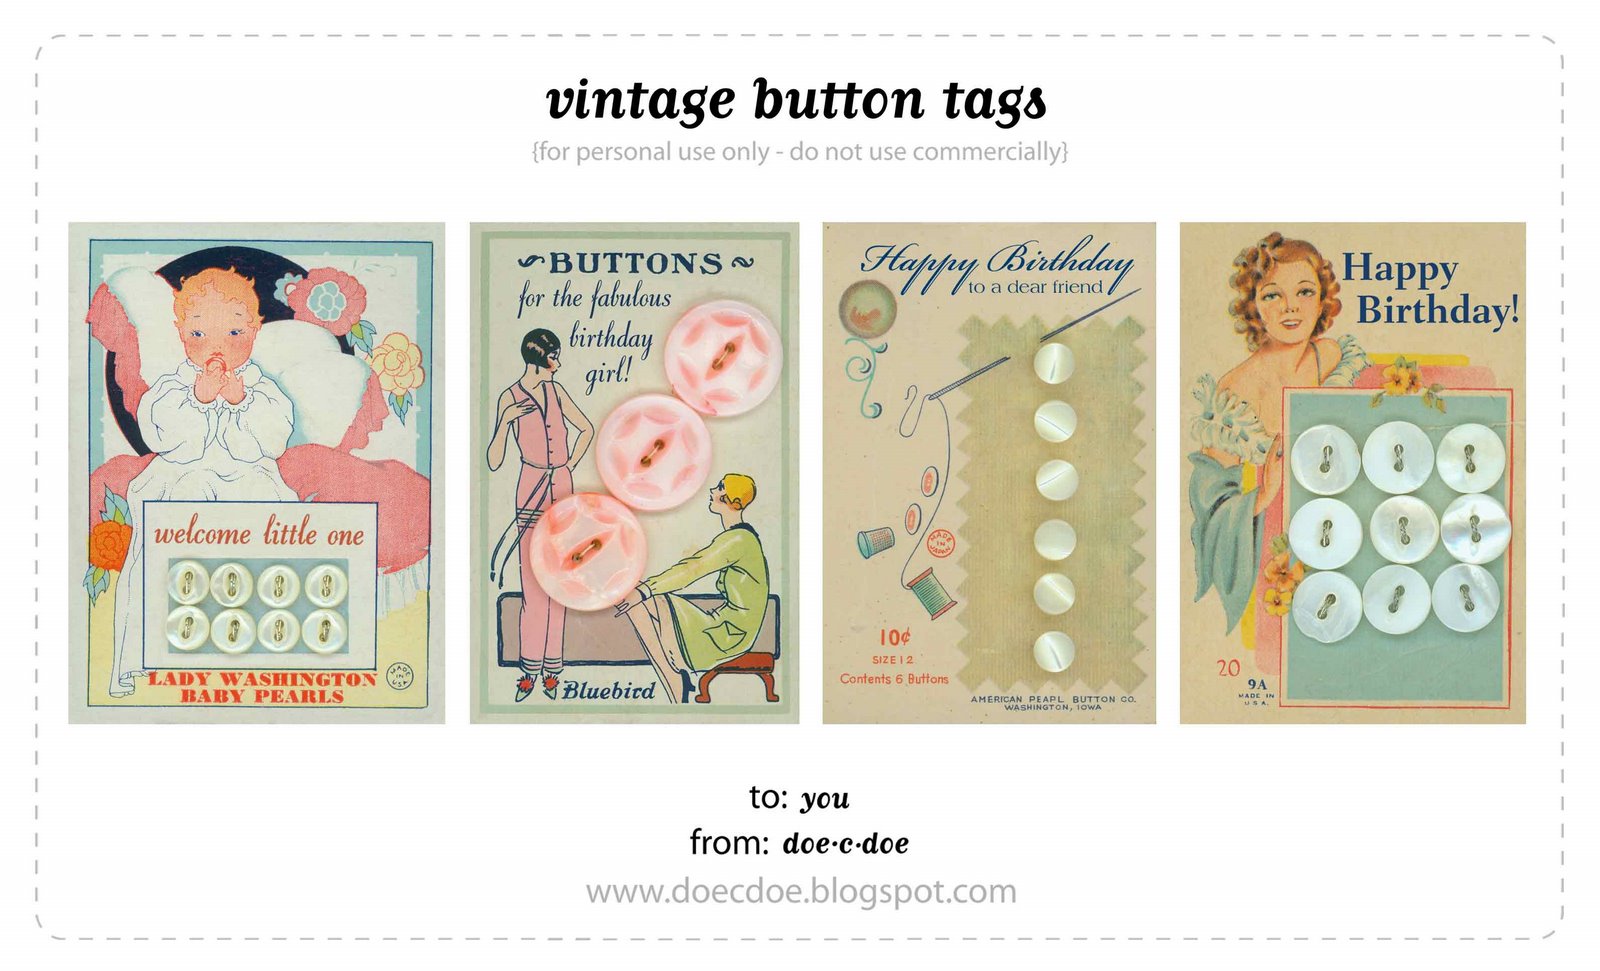 [vintage-button-tags.jpg]